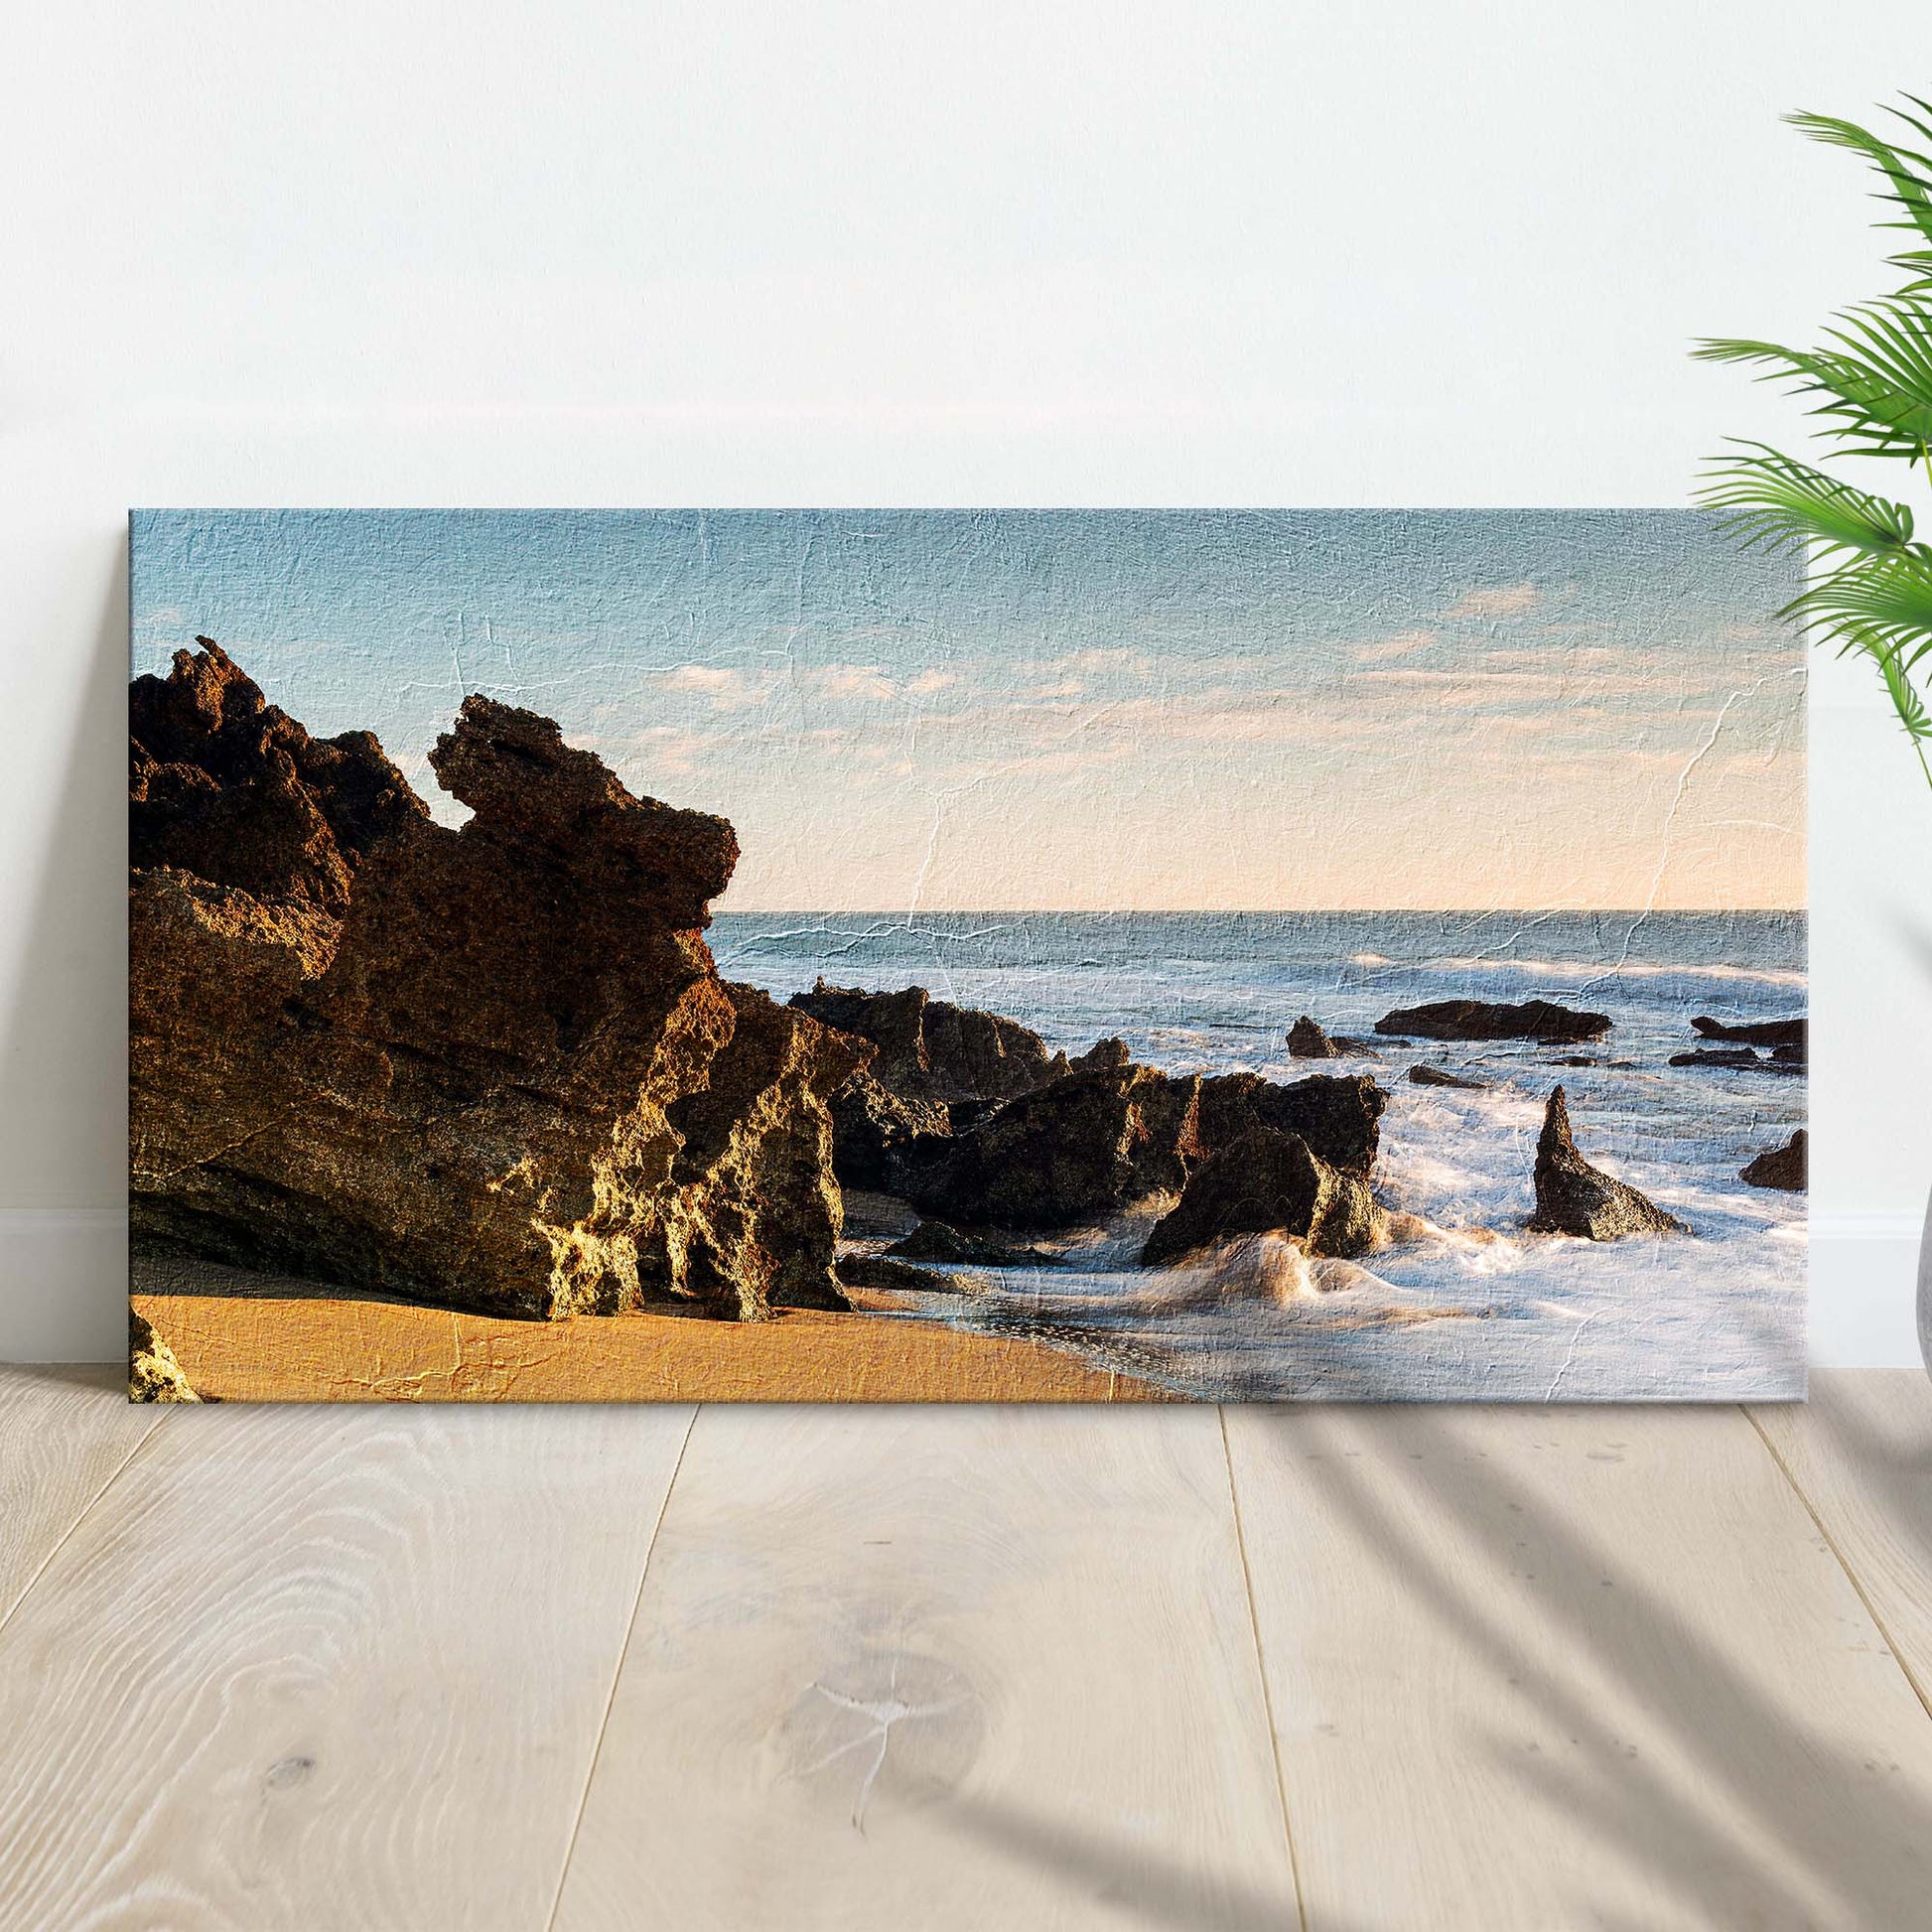 Sunset At California Beach Canvas Wall Art - Image by Tailored Canvases